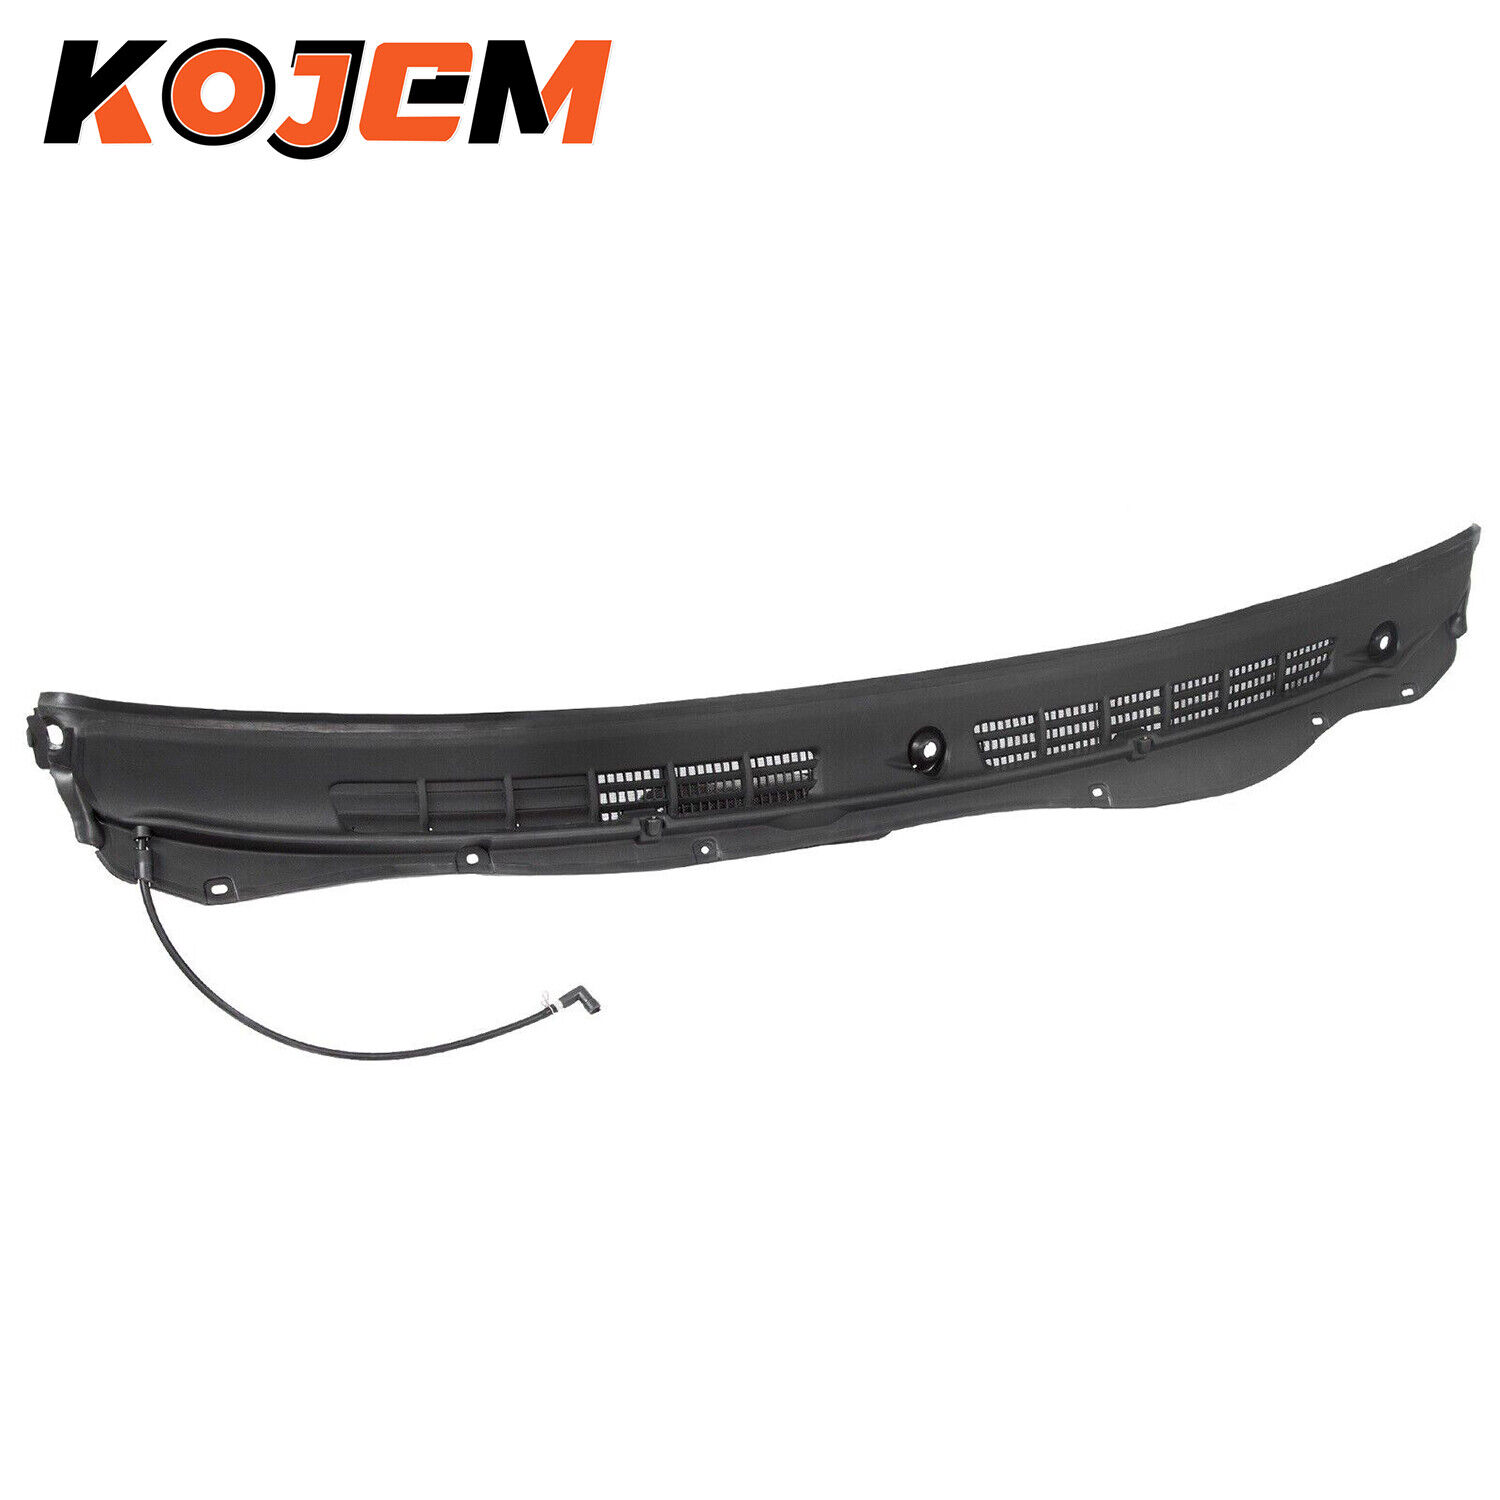 KOJEM For Chevy Colorado GMC Canyon Windshield Cowl Grille Vent For 20820072